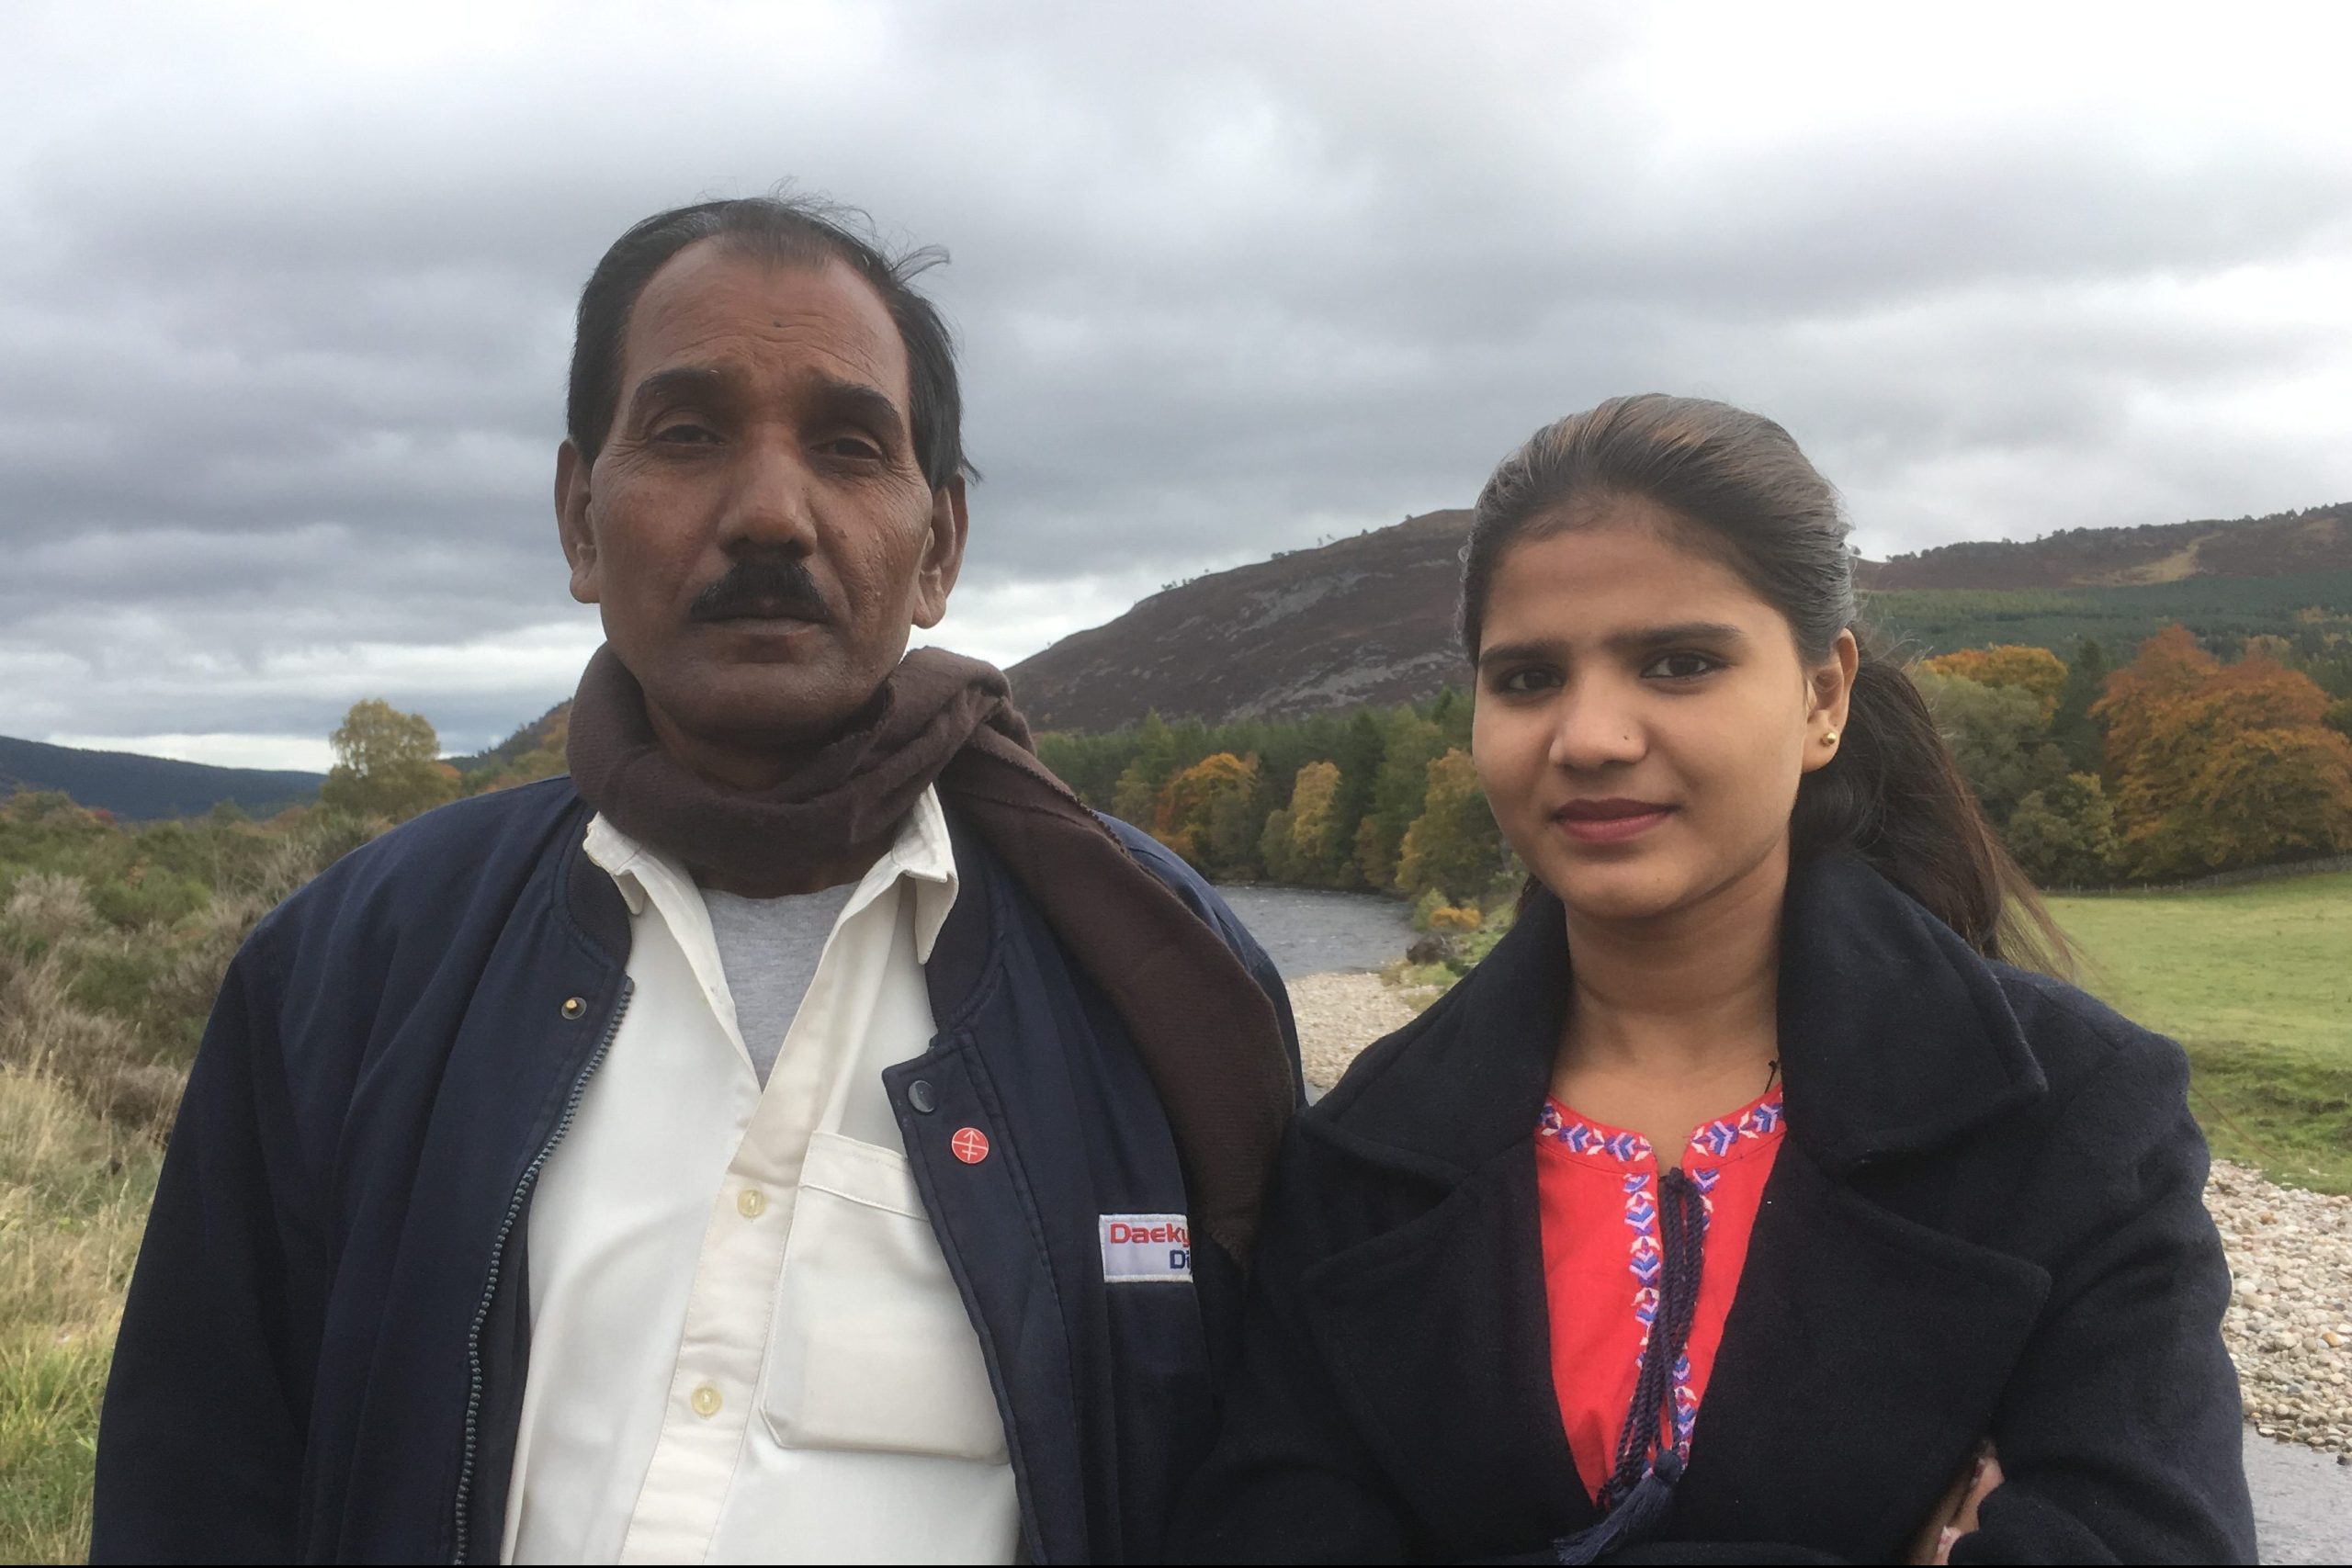 Asia Bibi’s husband and daughter, Ashiq Masih and Eisham Ashiq, during their October 2018 visit to the UK as guests of Aid to the Church in Need (© ACN).